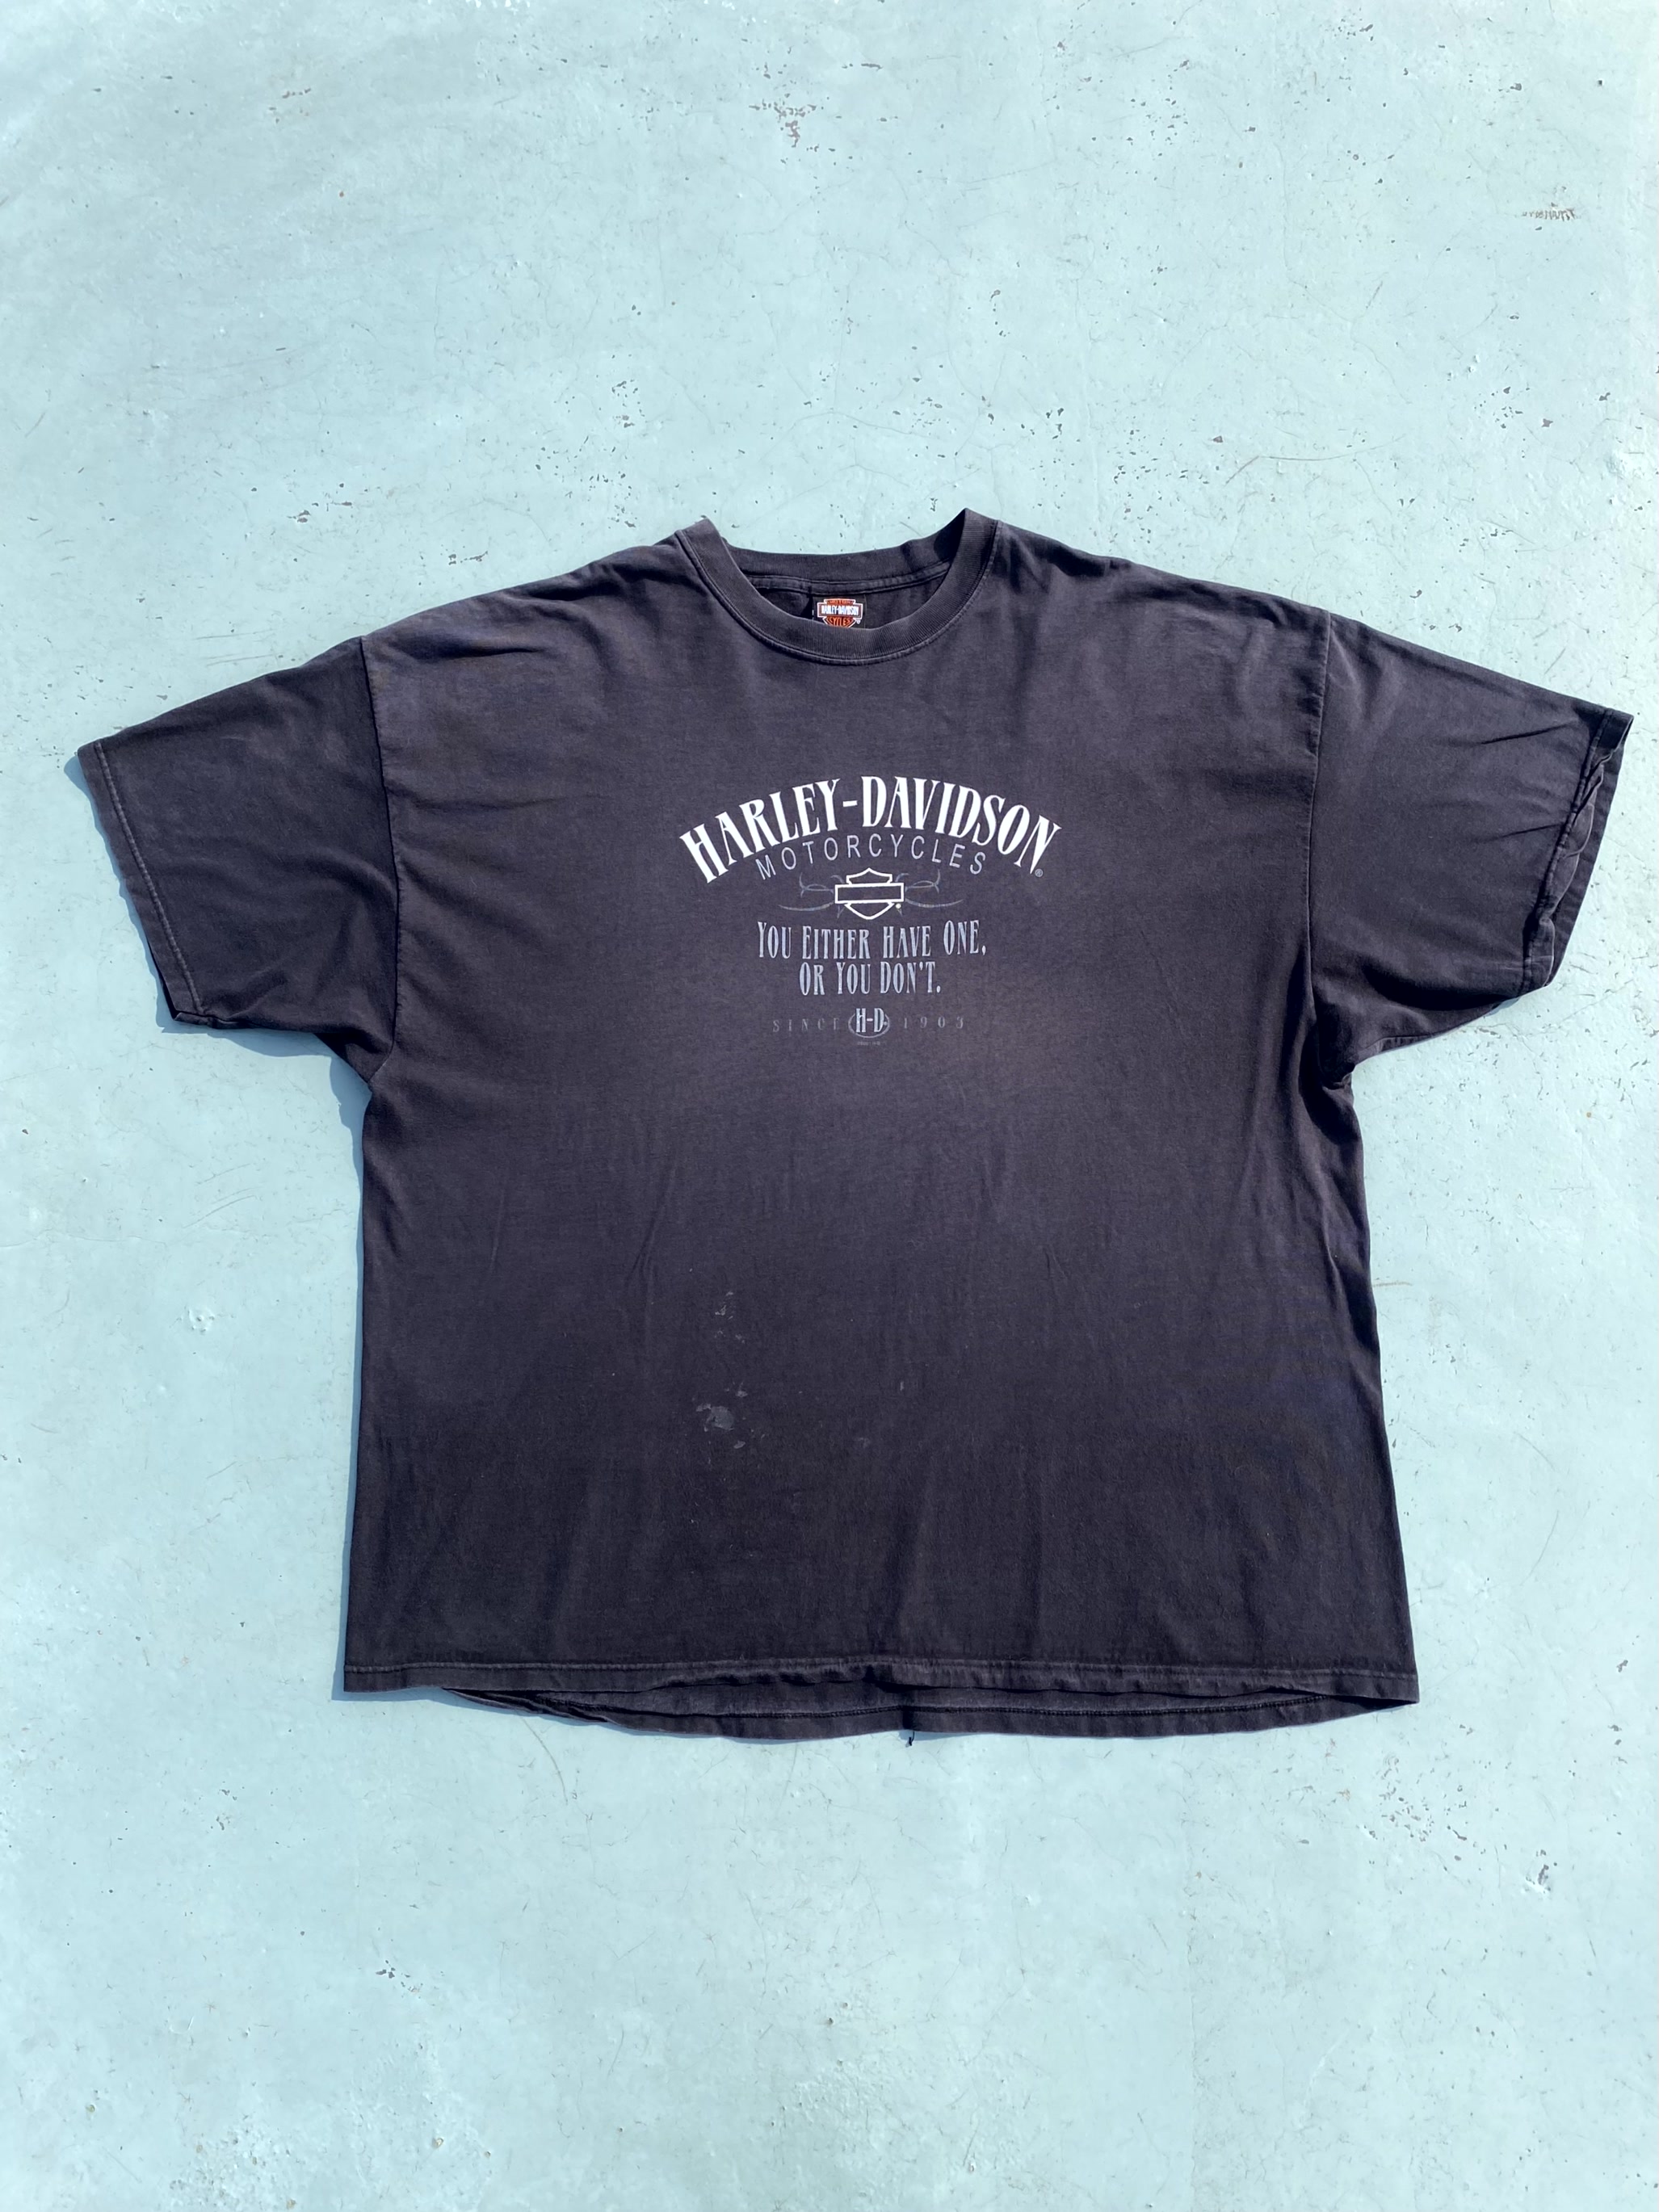 Harley Davidson &#039;You Either Have One, Or You Don&#039;t&#039; Printing T-Shirt 4XL(110~) - 체리피커